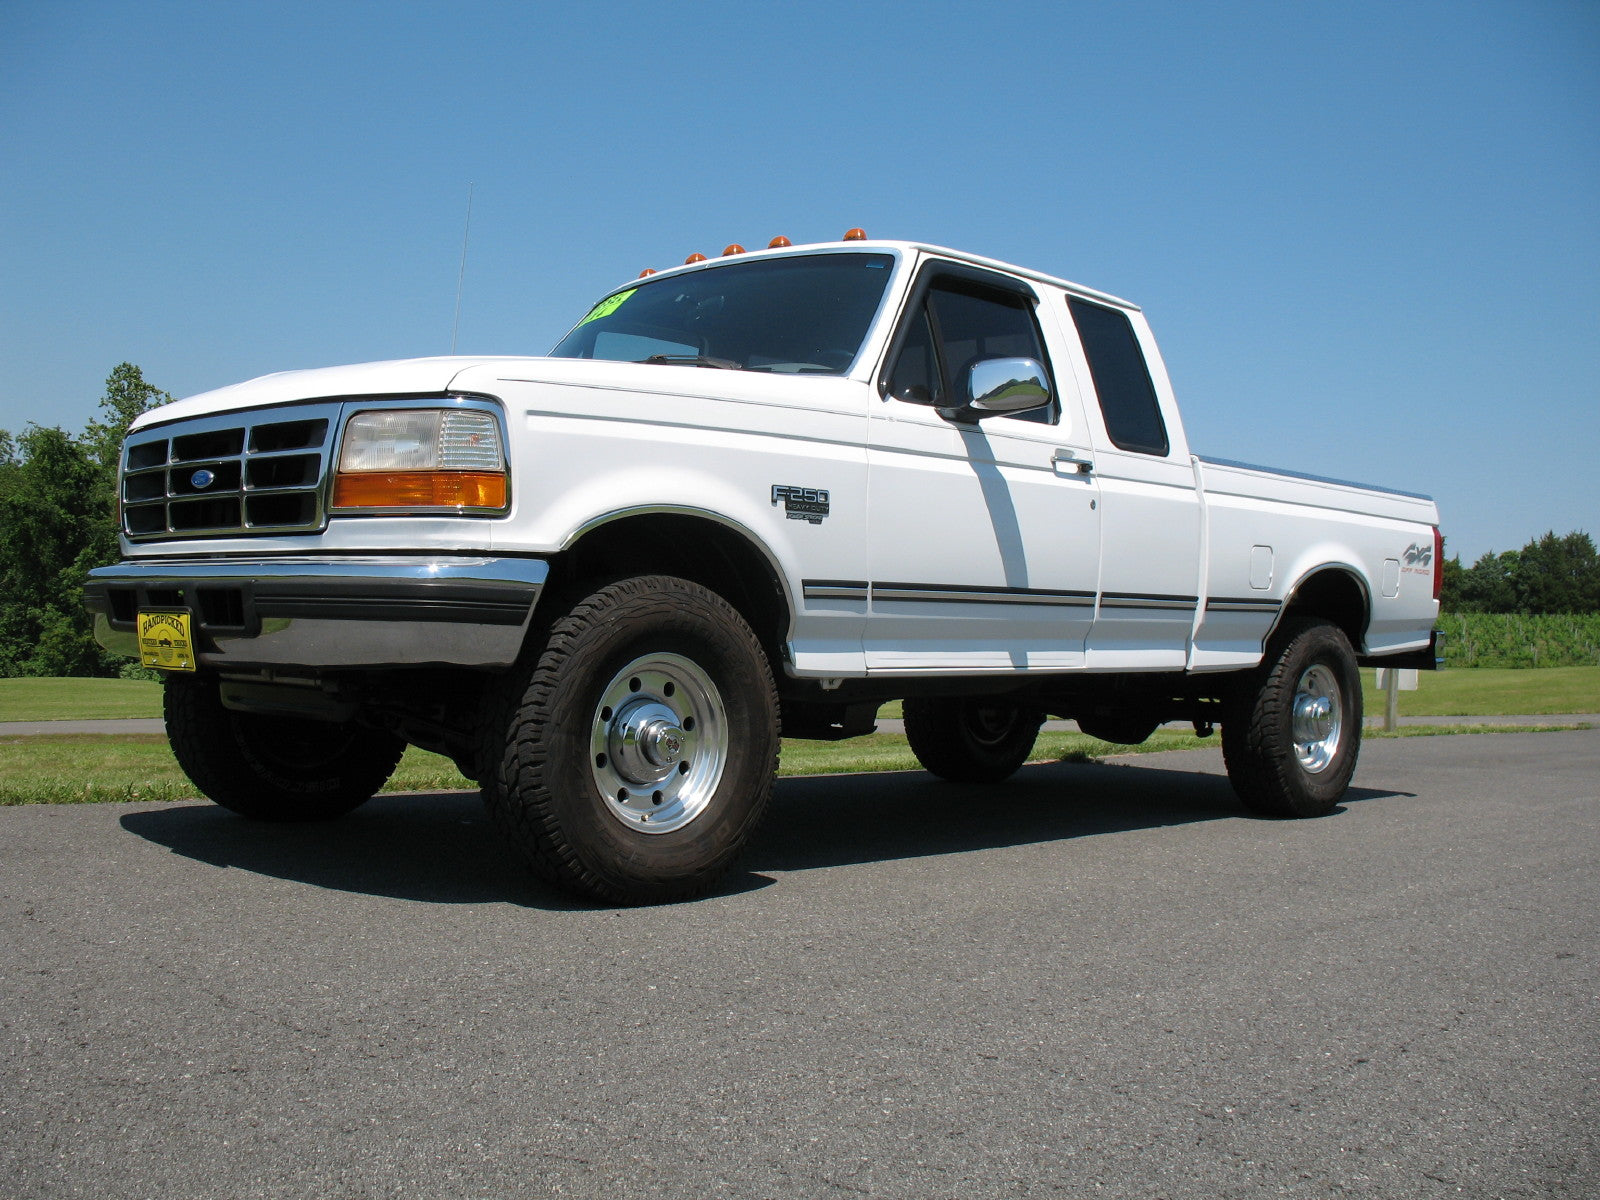 Sold 1997 Ford F250 Extended Cab Short Bed Diesel Truck